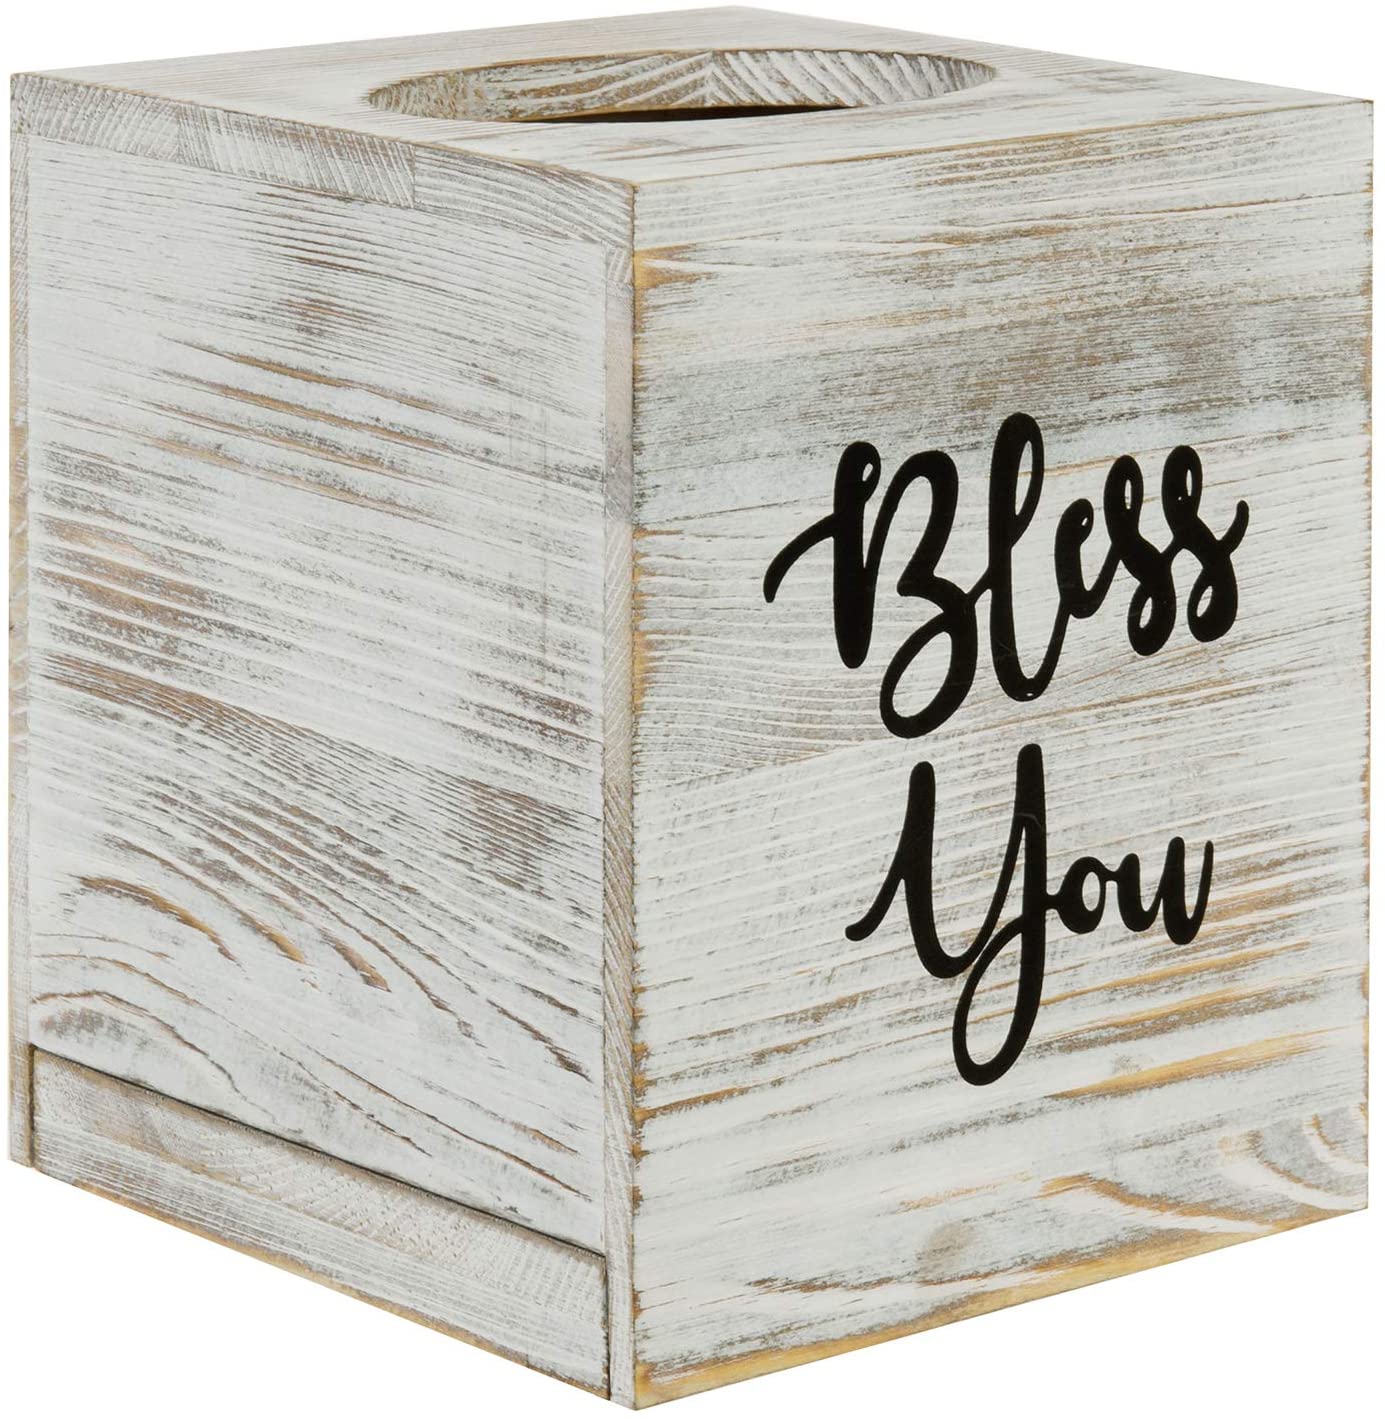 Bless You Shabby Whitewashed Wood Square Tissue Box Holder Cover